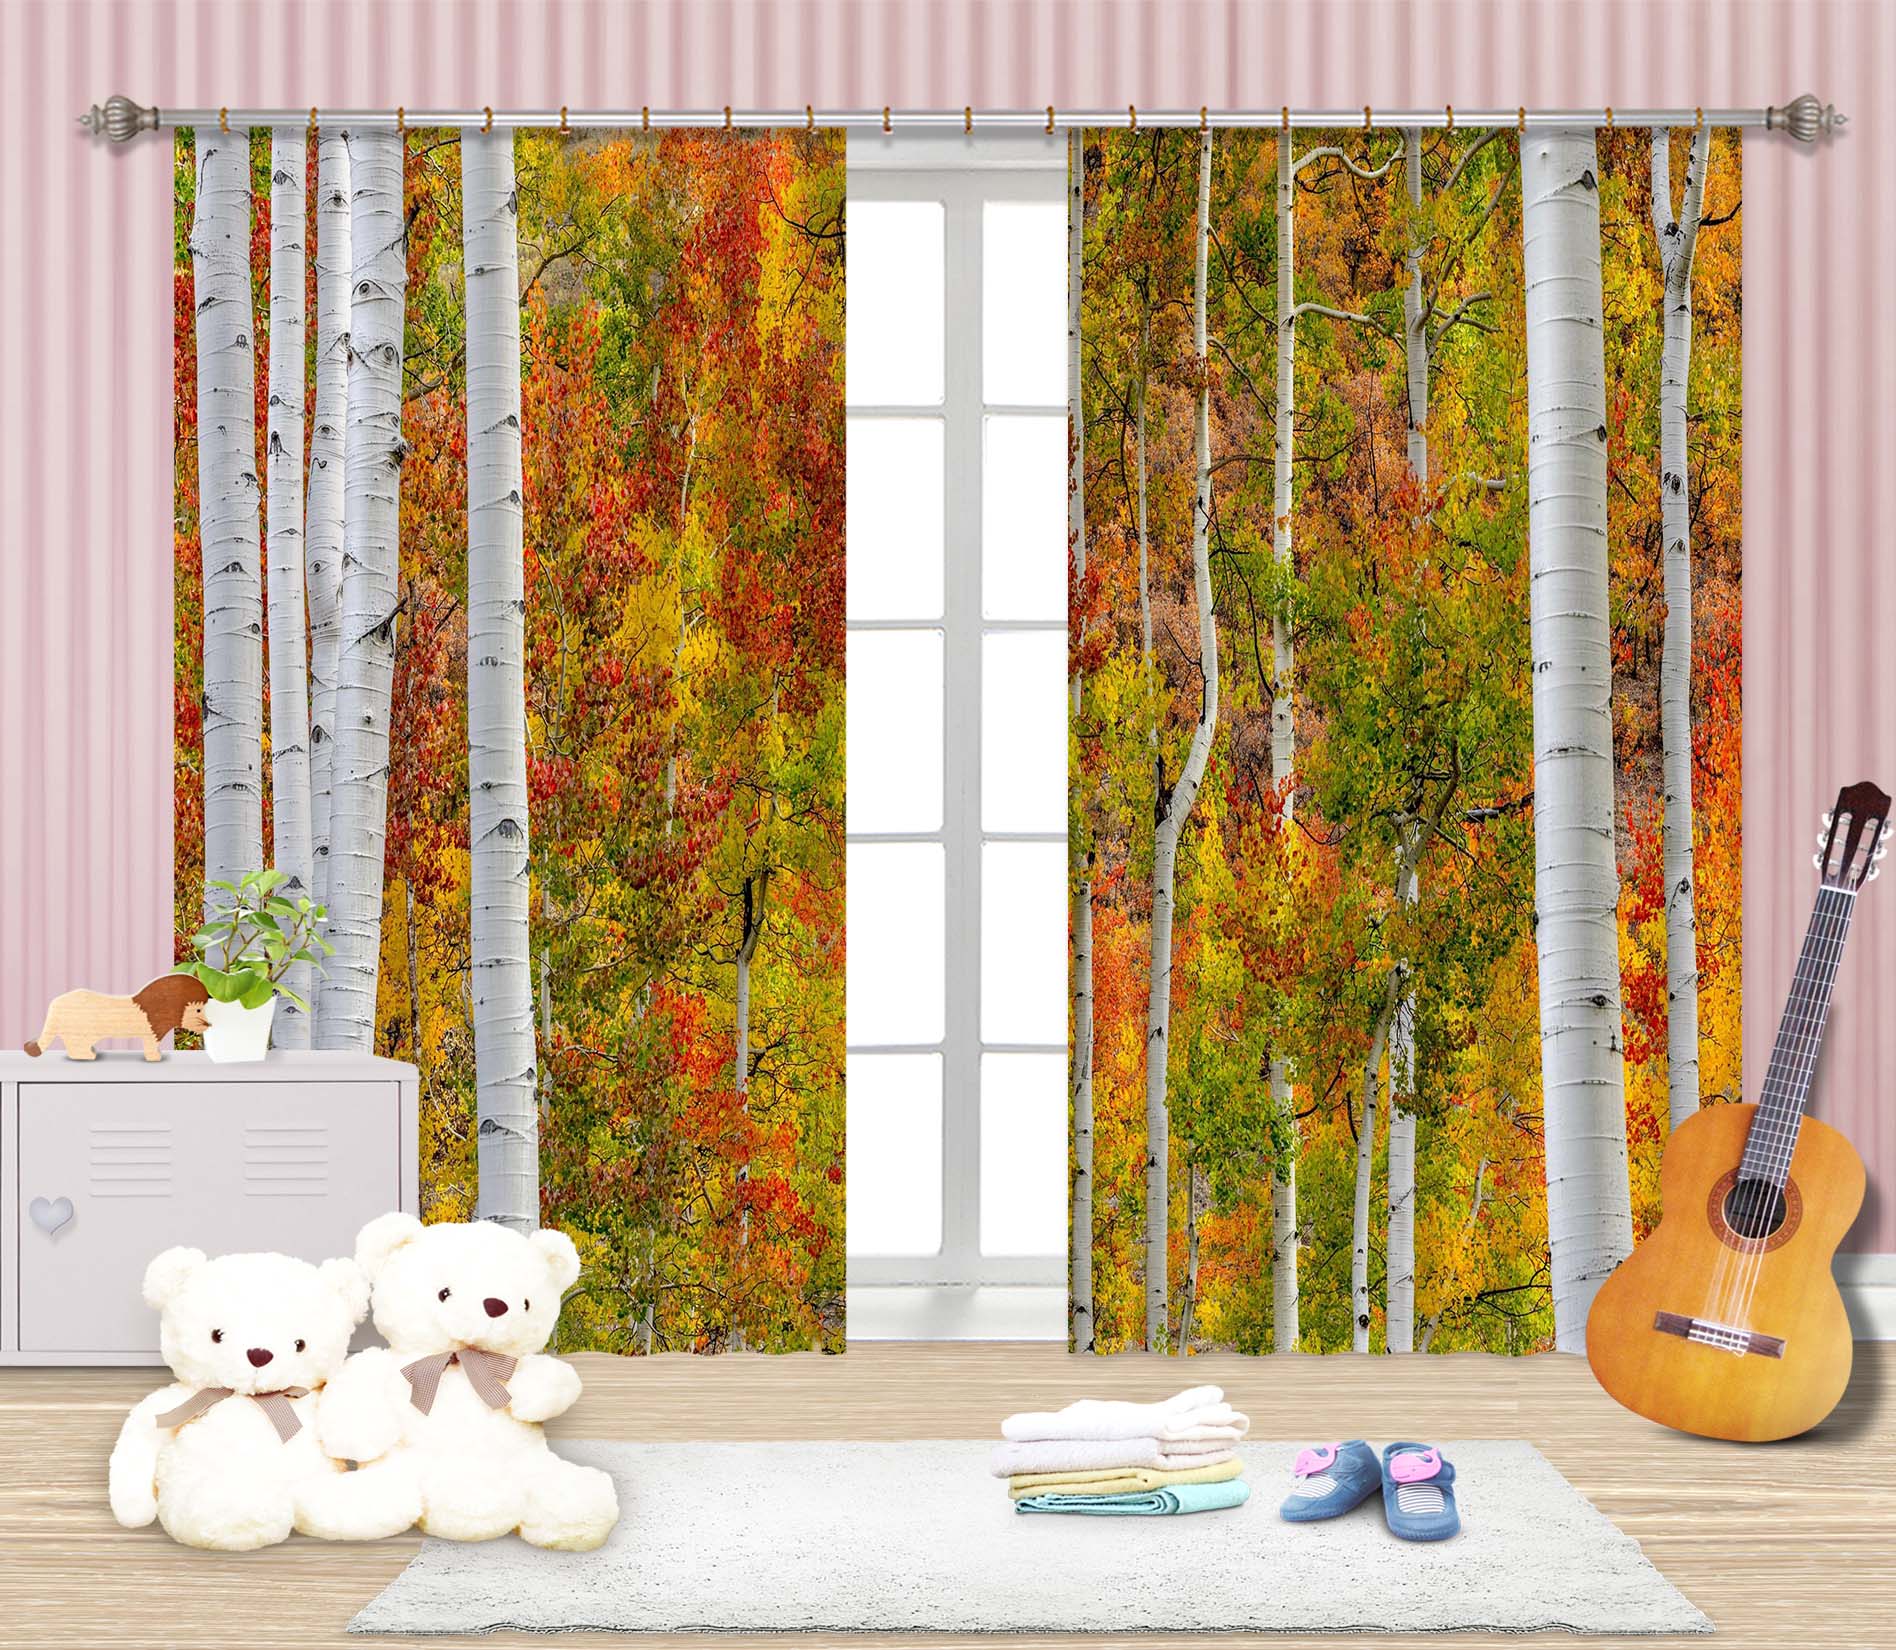 3D Sunny Forest 049 Marco Carmassi Curtain Curtains Drapes